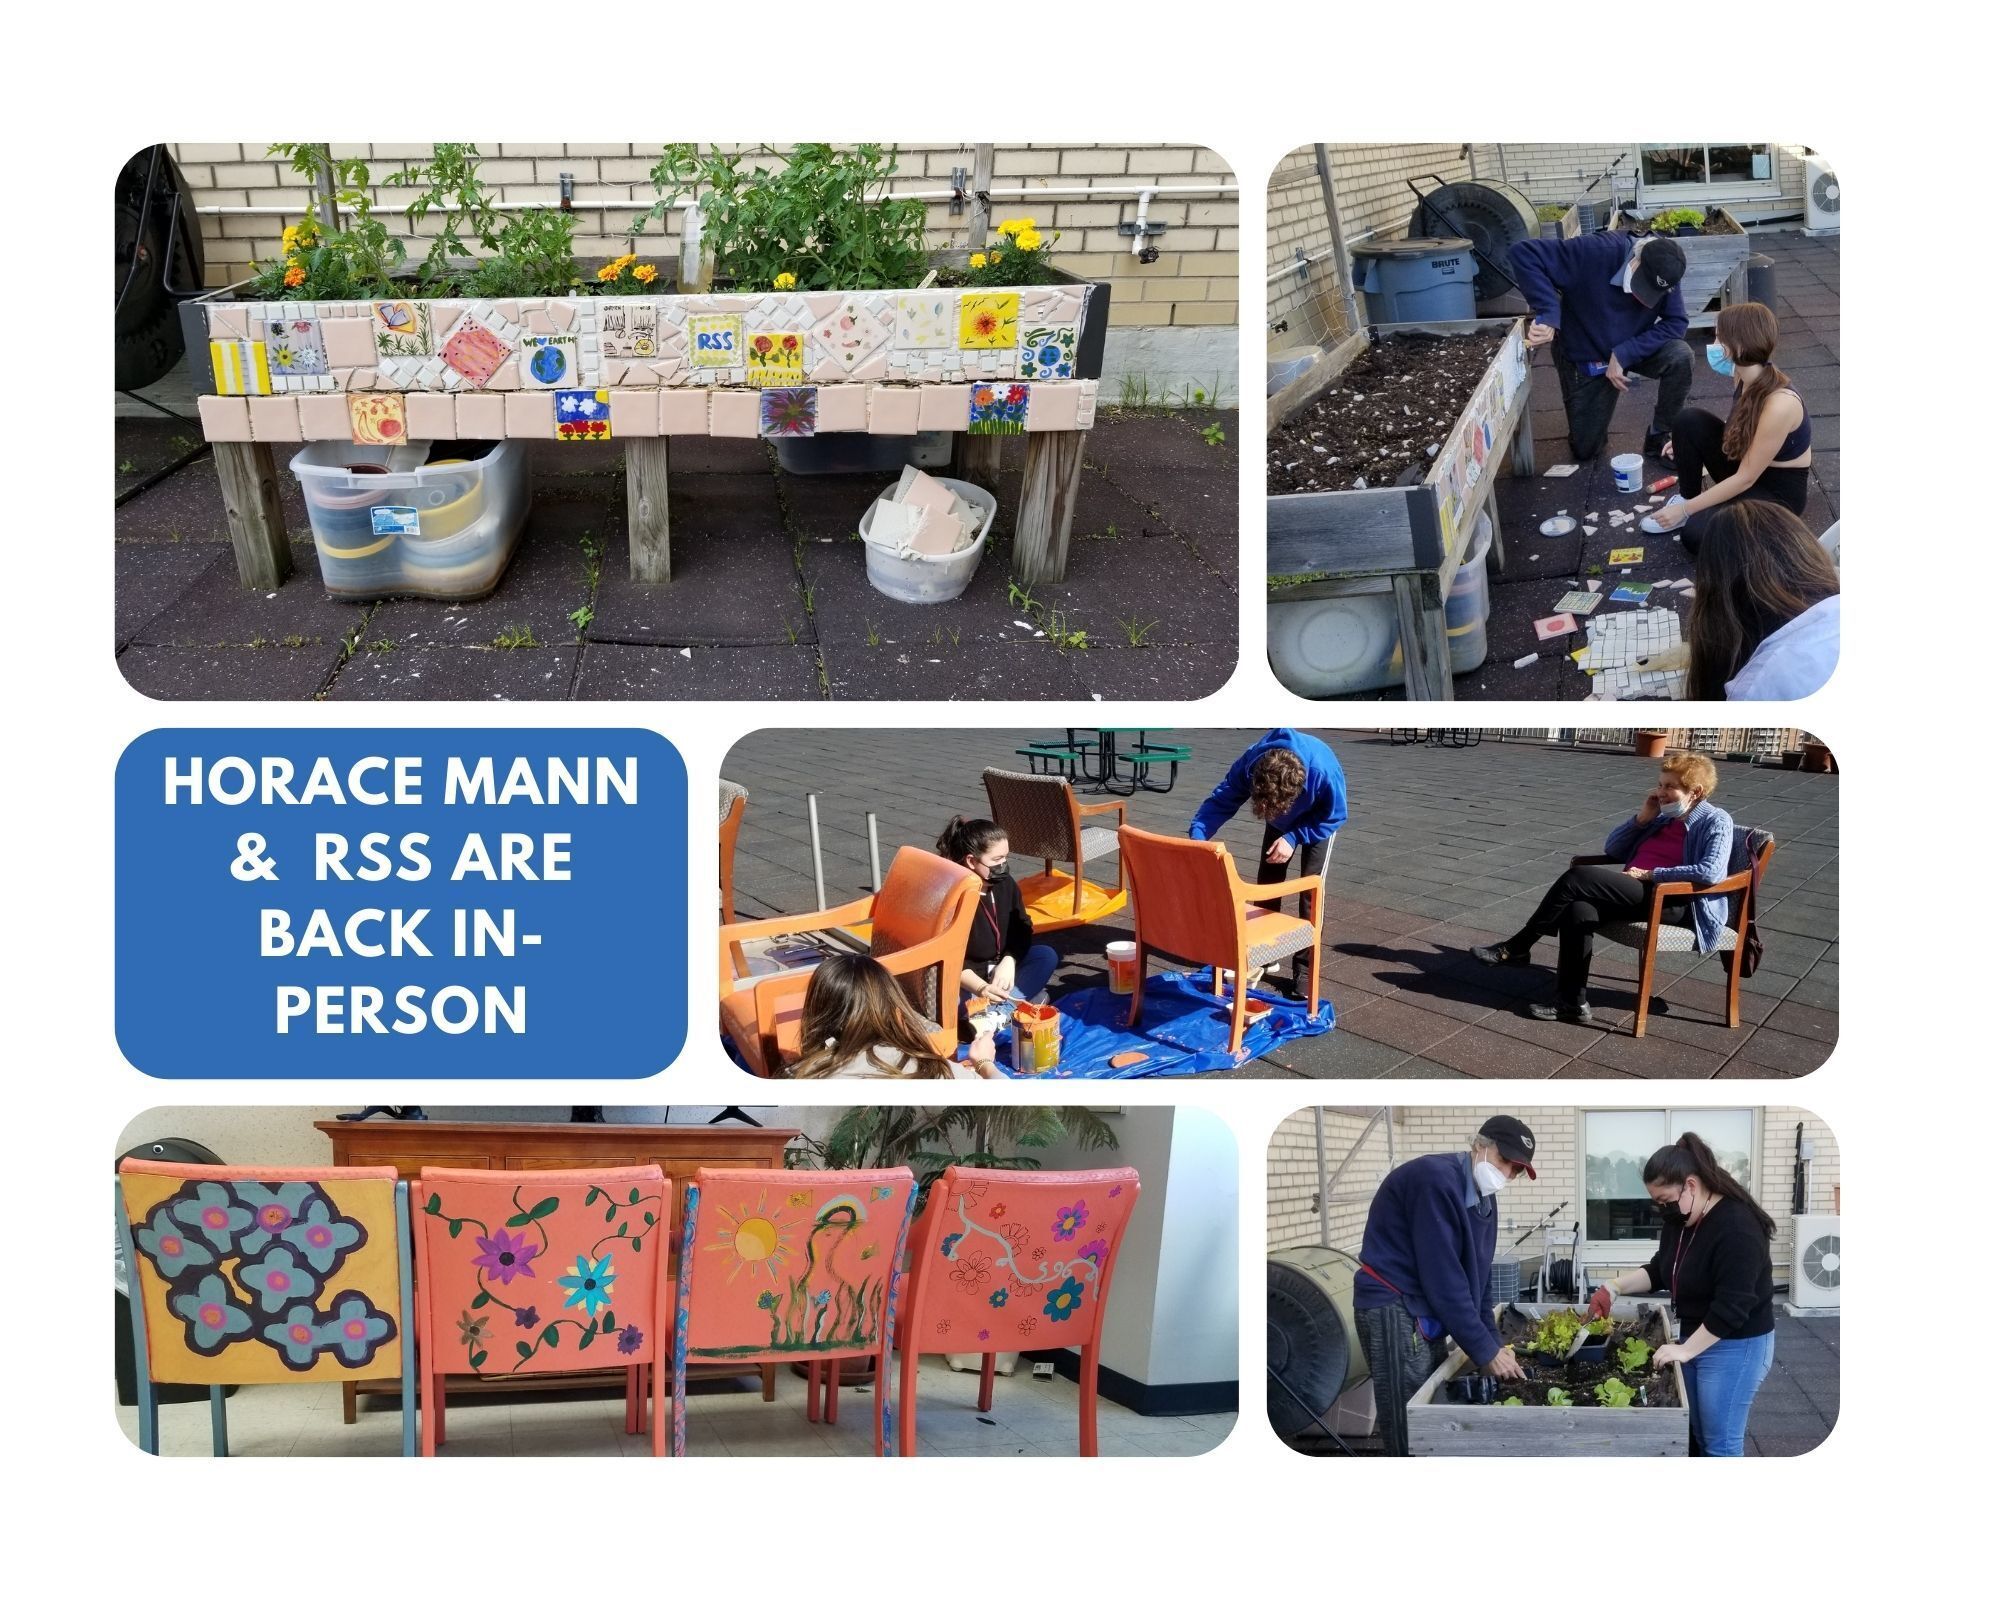 Tiles and chairs decorated by Horace Mann students with RSS members for the terrace garden.